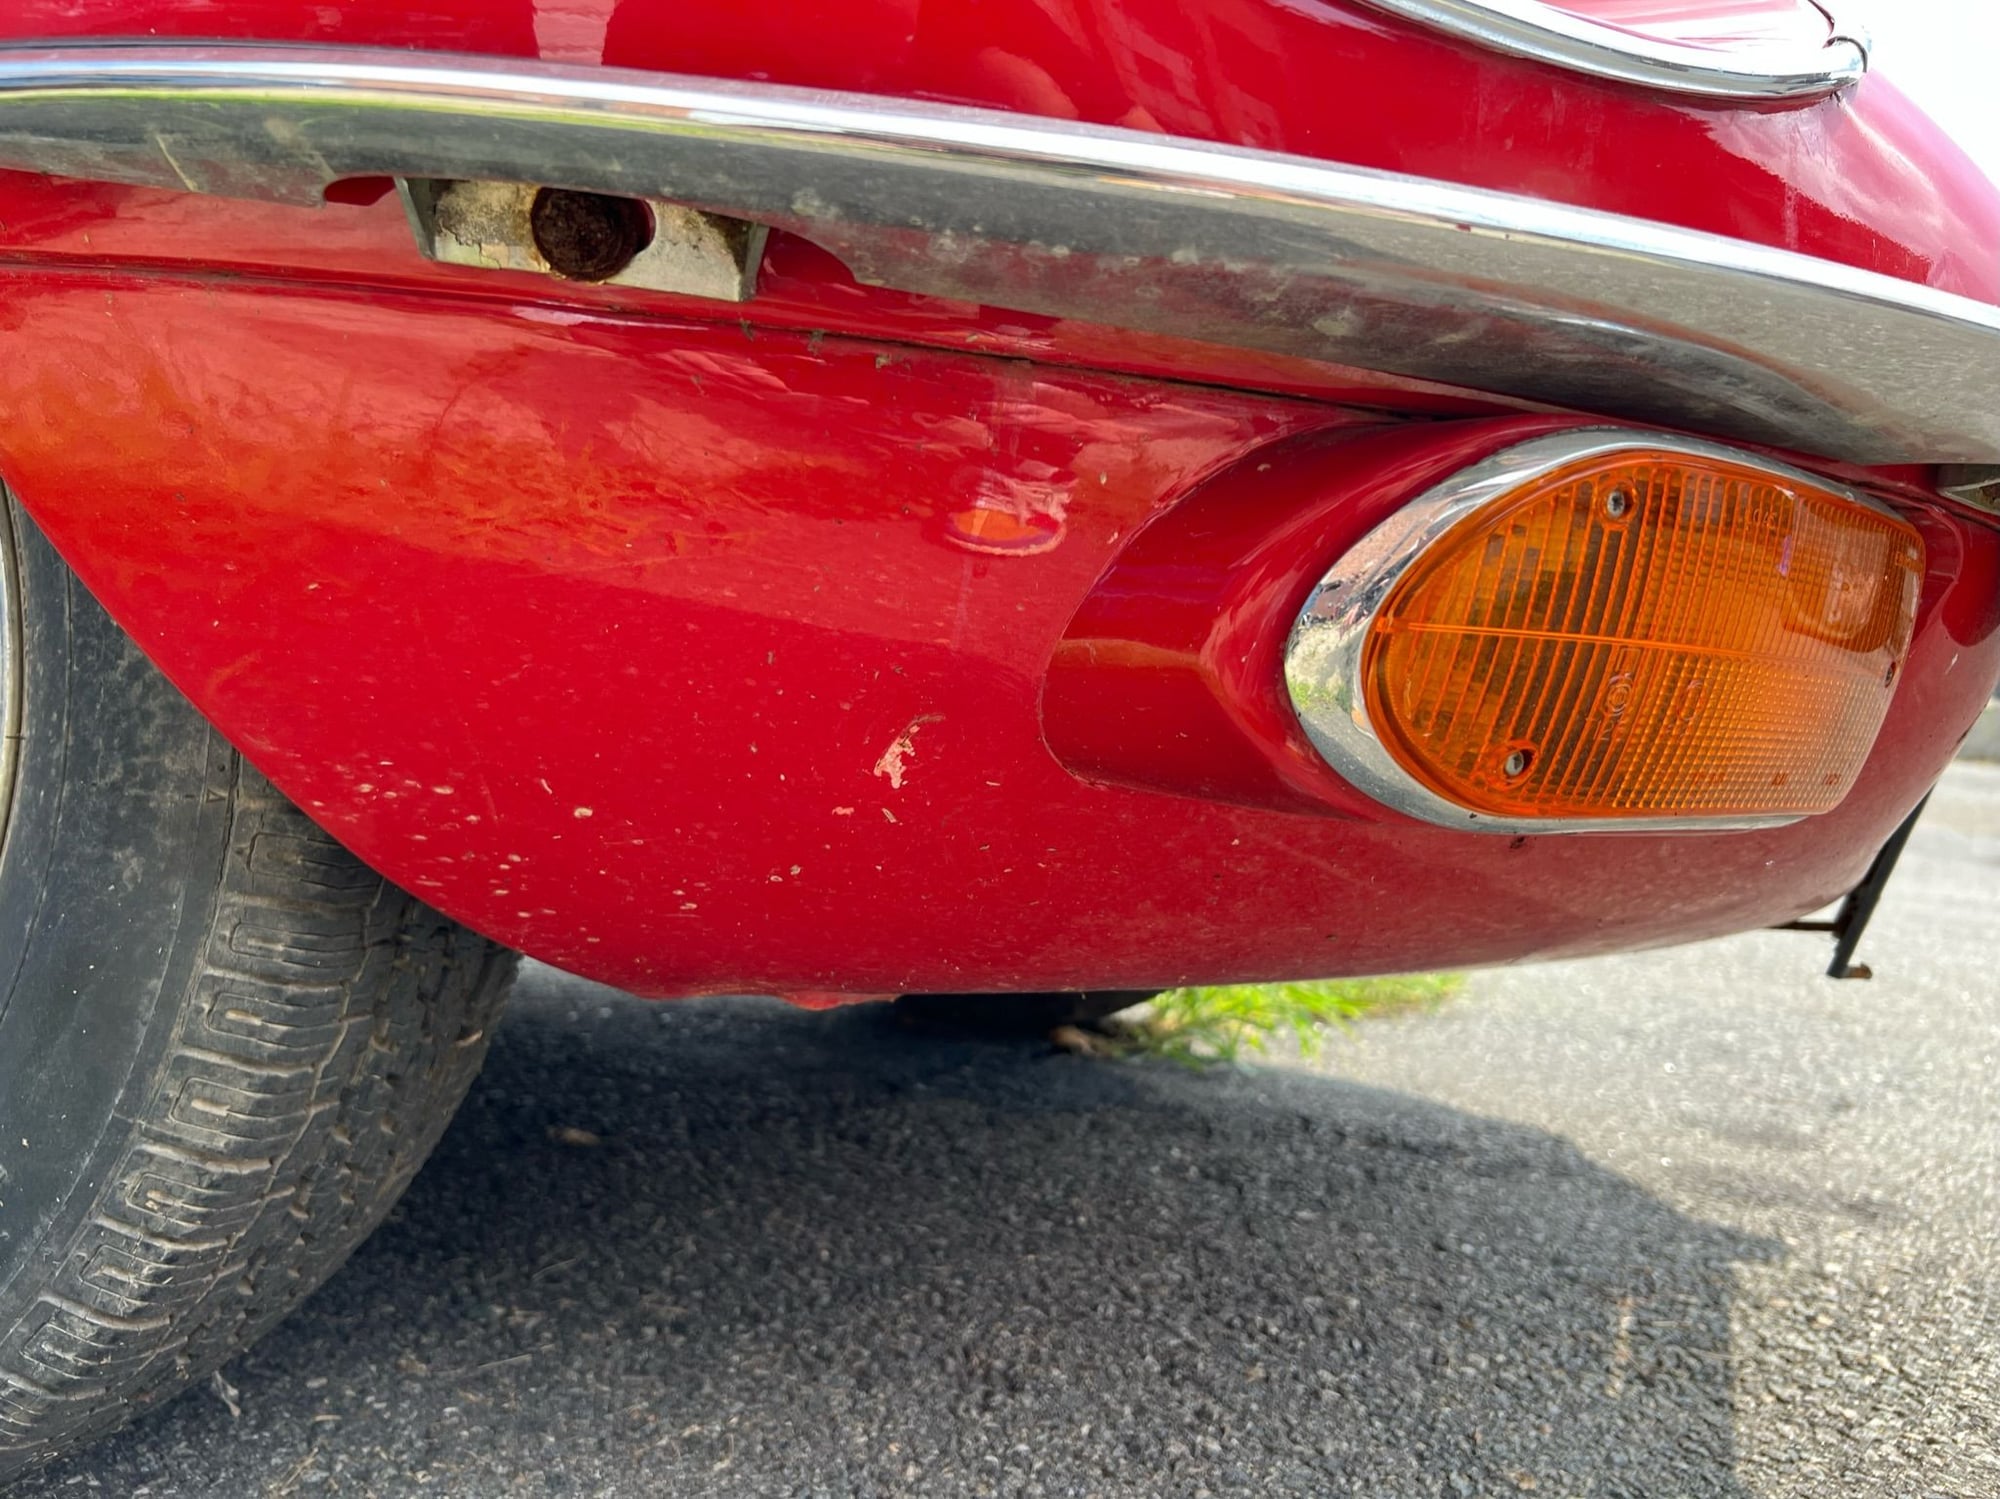 1969 Jaguar XKE - 1969 Jaguar E-Type/XKE FHC S2 - Used - VIN P1R26899 - 63,456 Miles - 6 cyl - 2WD - Manual - Coupe - Red - Los Angeles, CA 90027, United States